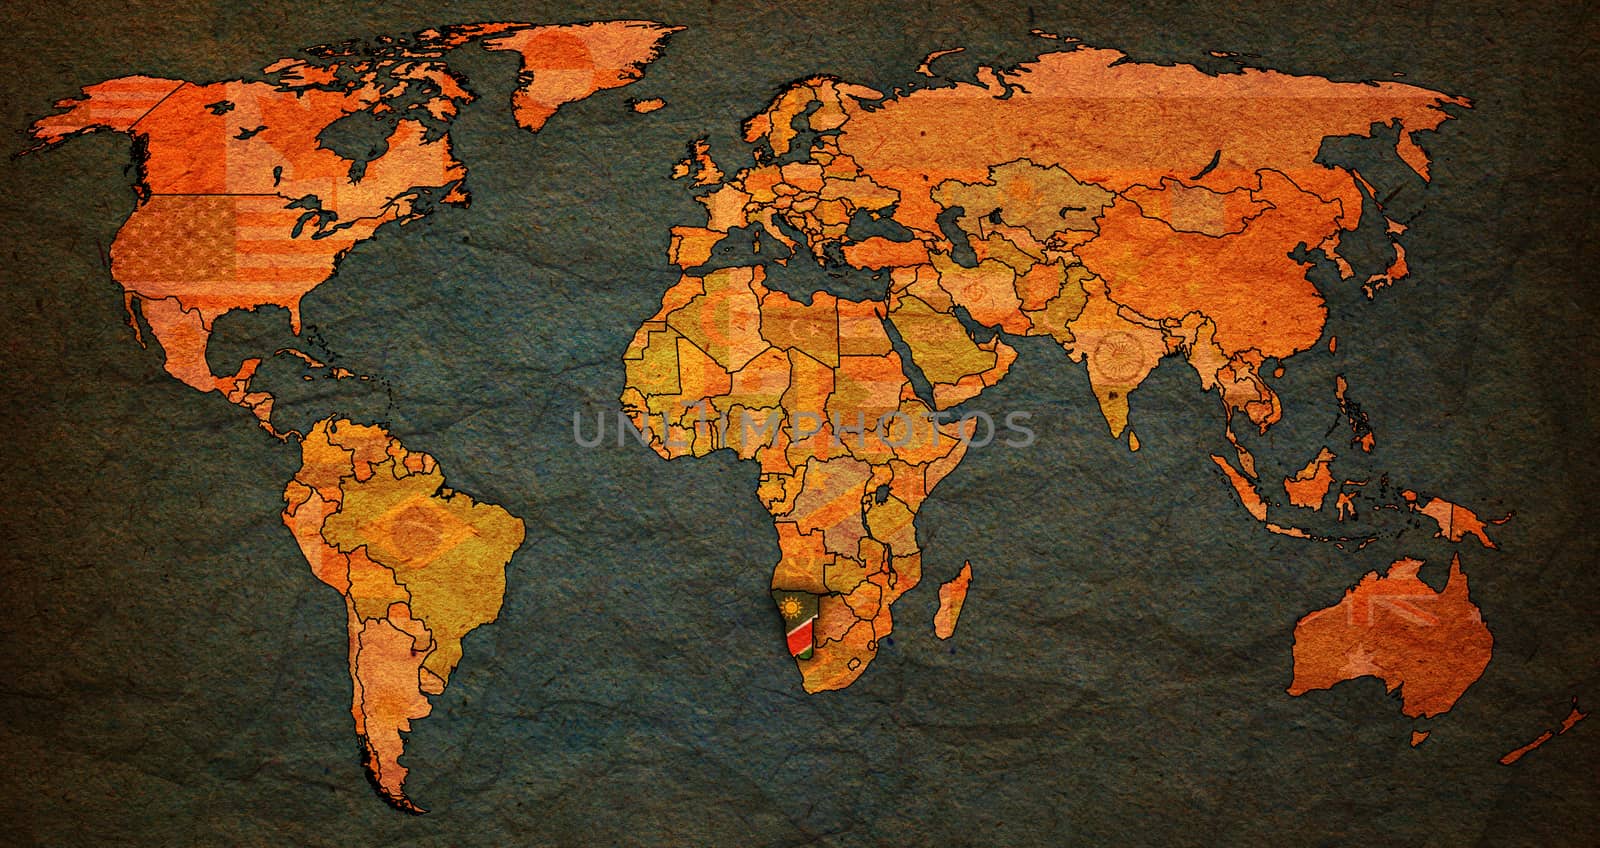 namibia territory on world map by michal812